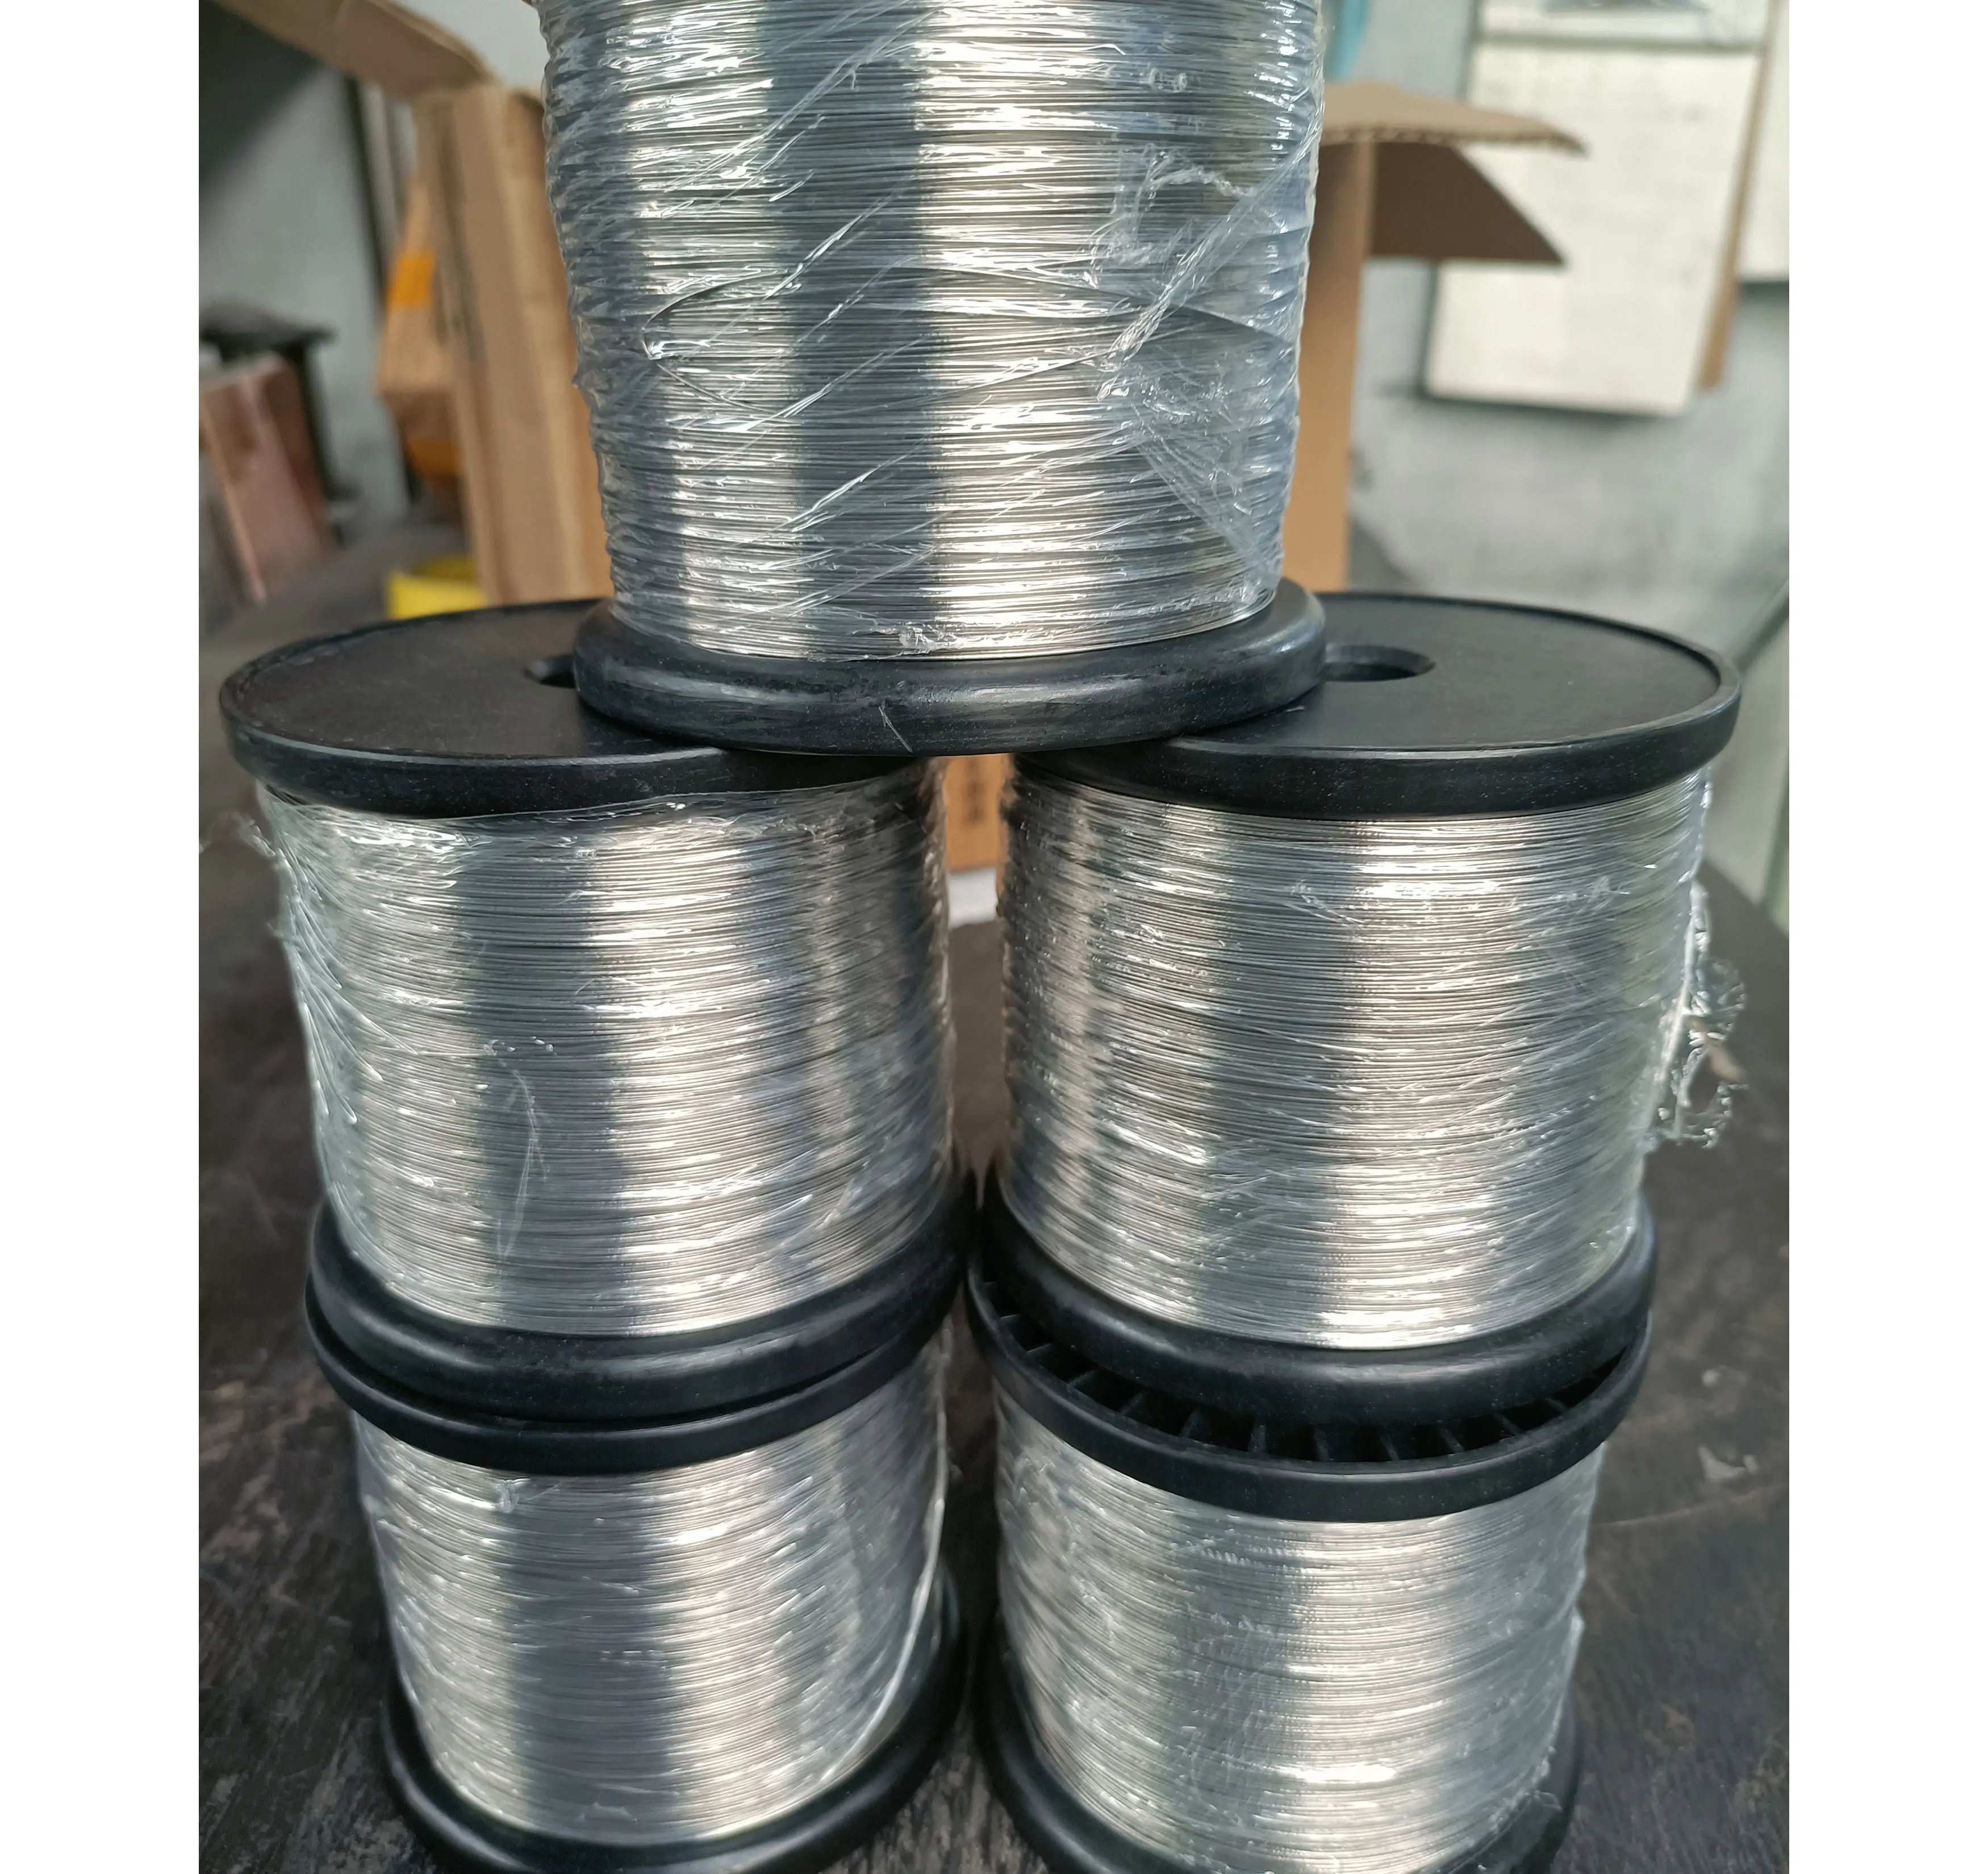 High Quality Manufacture nitinol shape memory alloy nickel titanium wire for medical